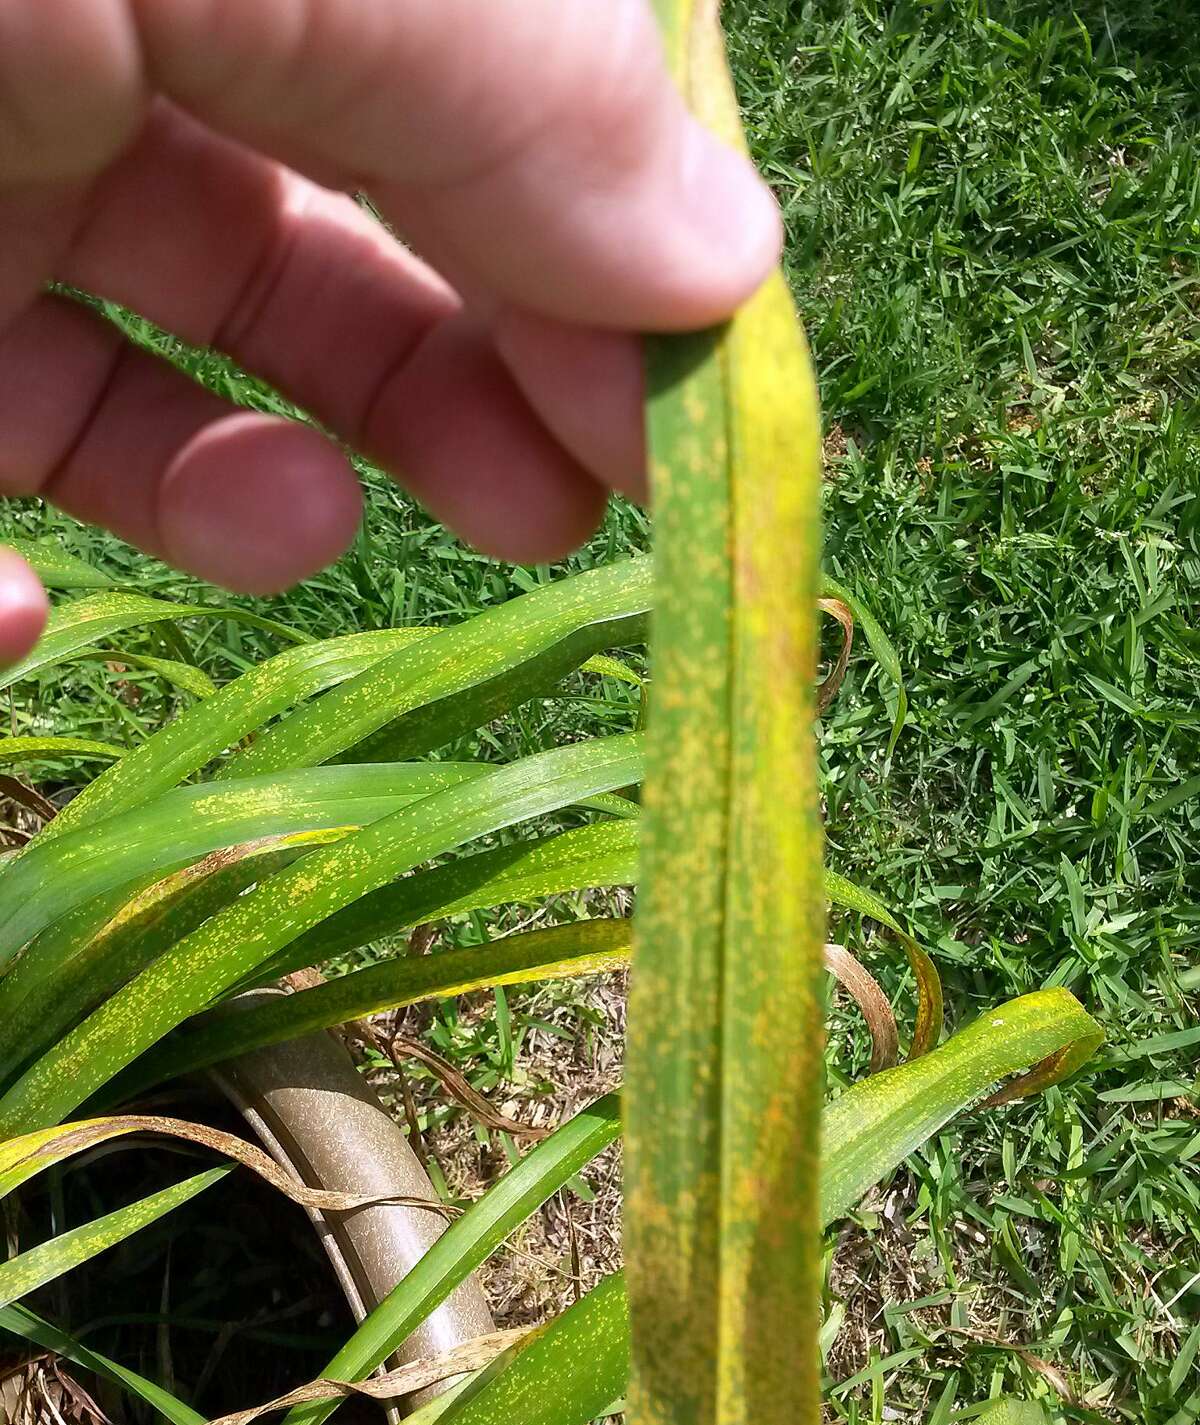 This is daylily rust. It was observed in China, and it has become well known to daylily enthusiasts since it was first observed in the U.S. in 2000.